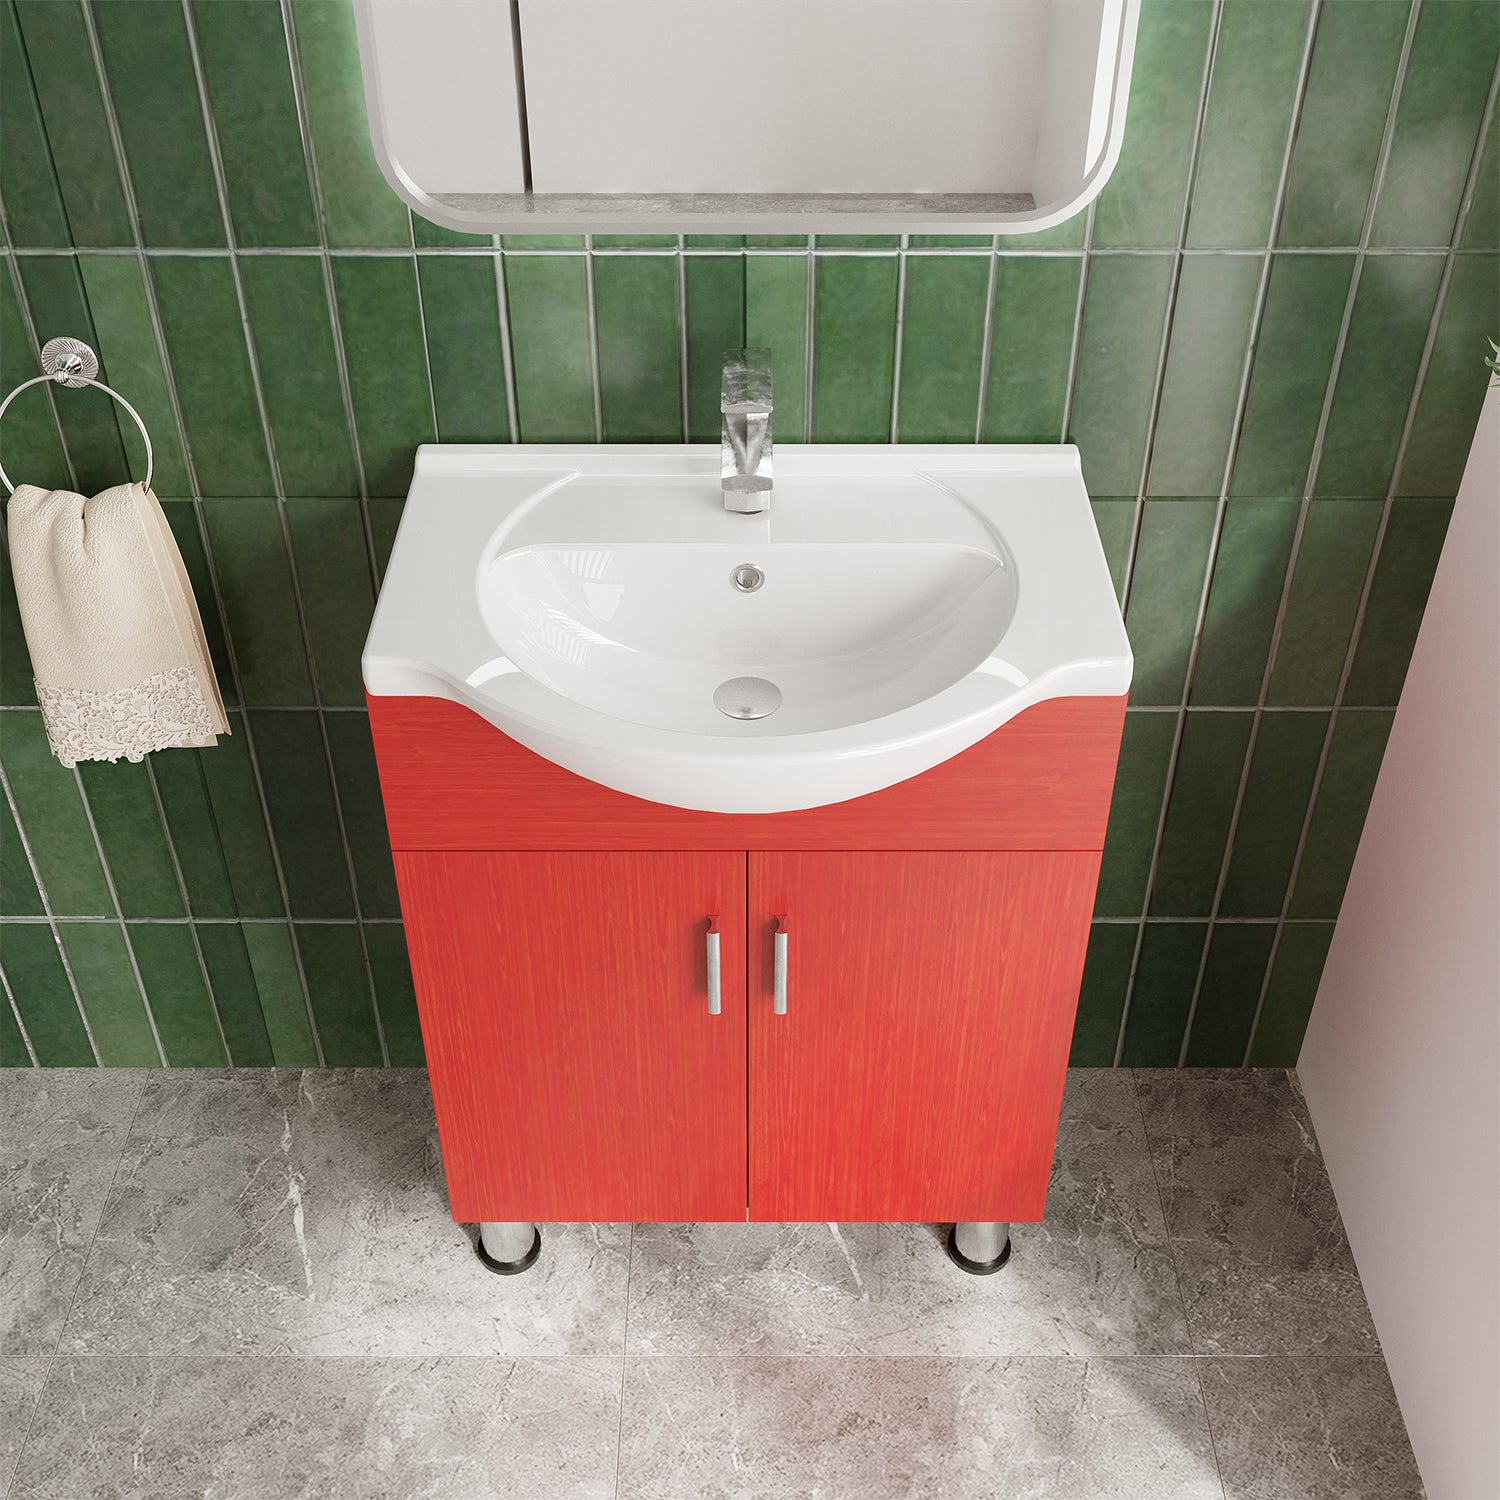 Lilly 24" W x 18" D x 34" H Euro-Style Vanity in Red with Ceramic Vanity Top in White - Dreamwerks